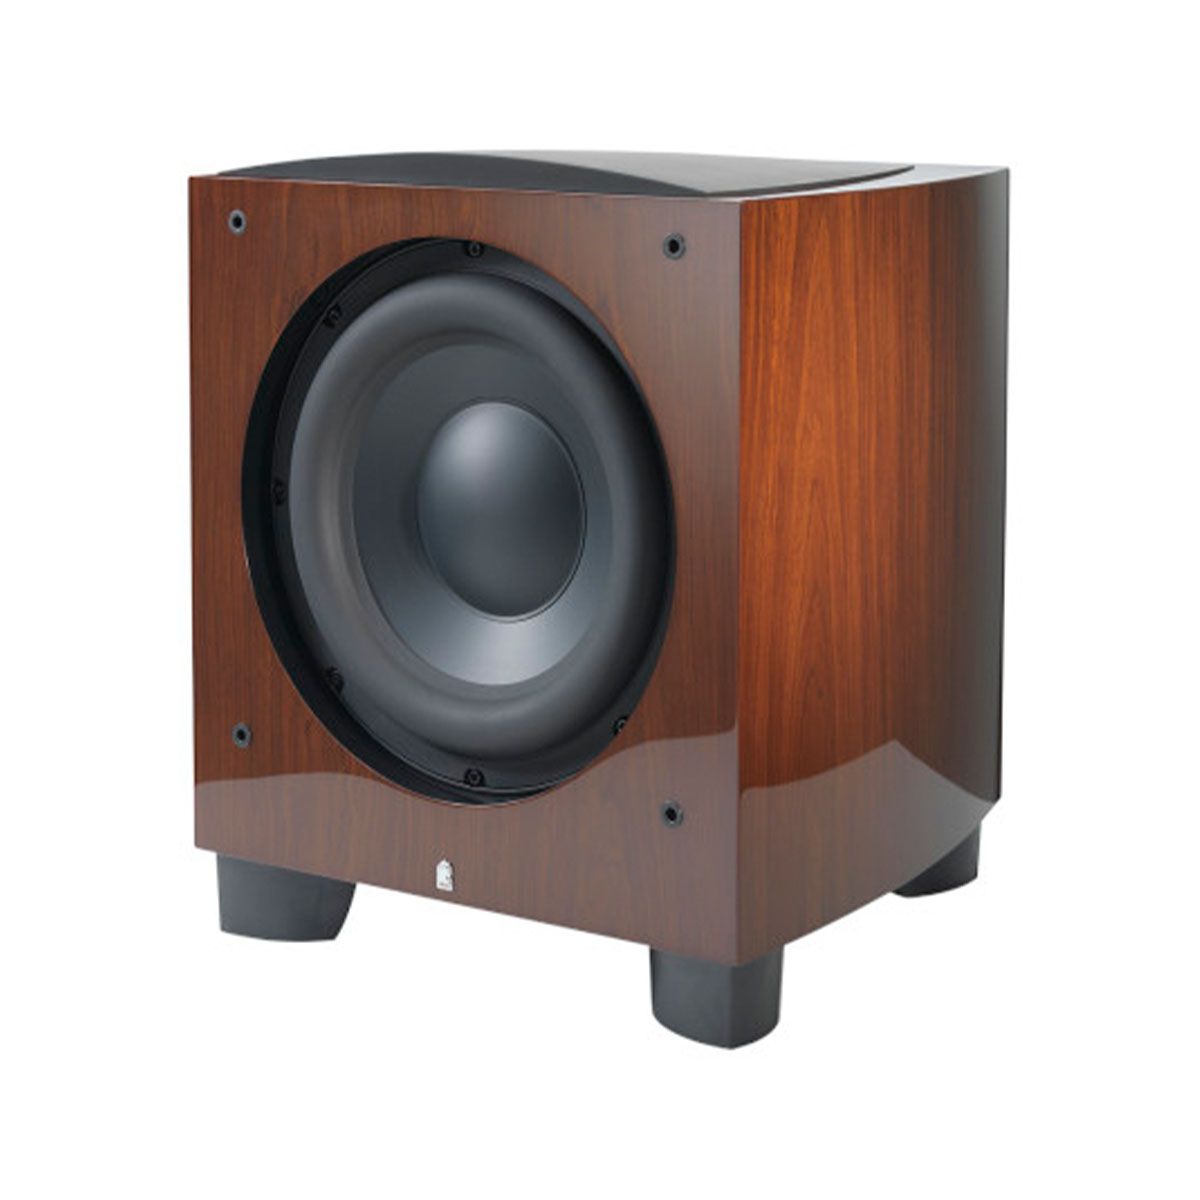 Revel B112v2 12” 1000W Powered Subwoofer - walnut single without grille - angled front view